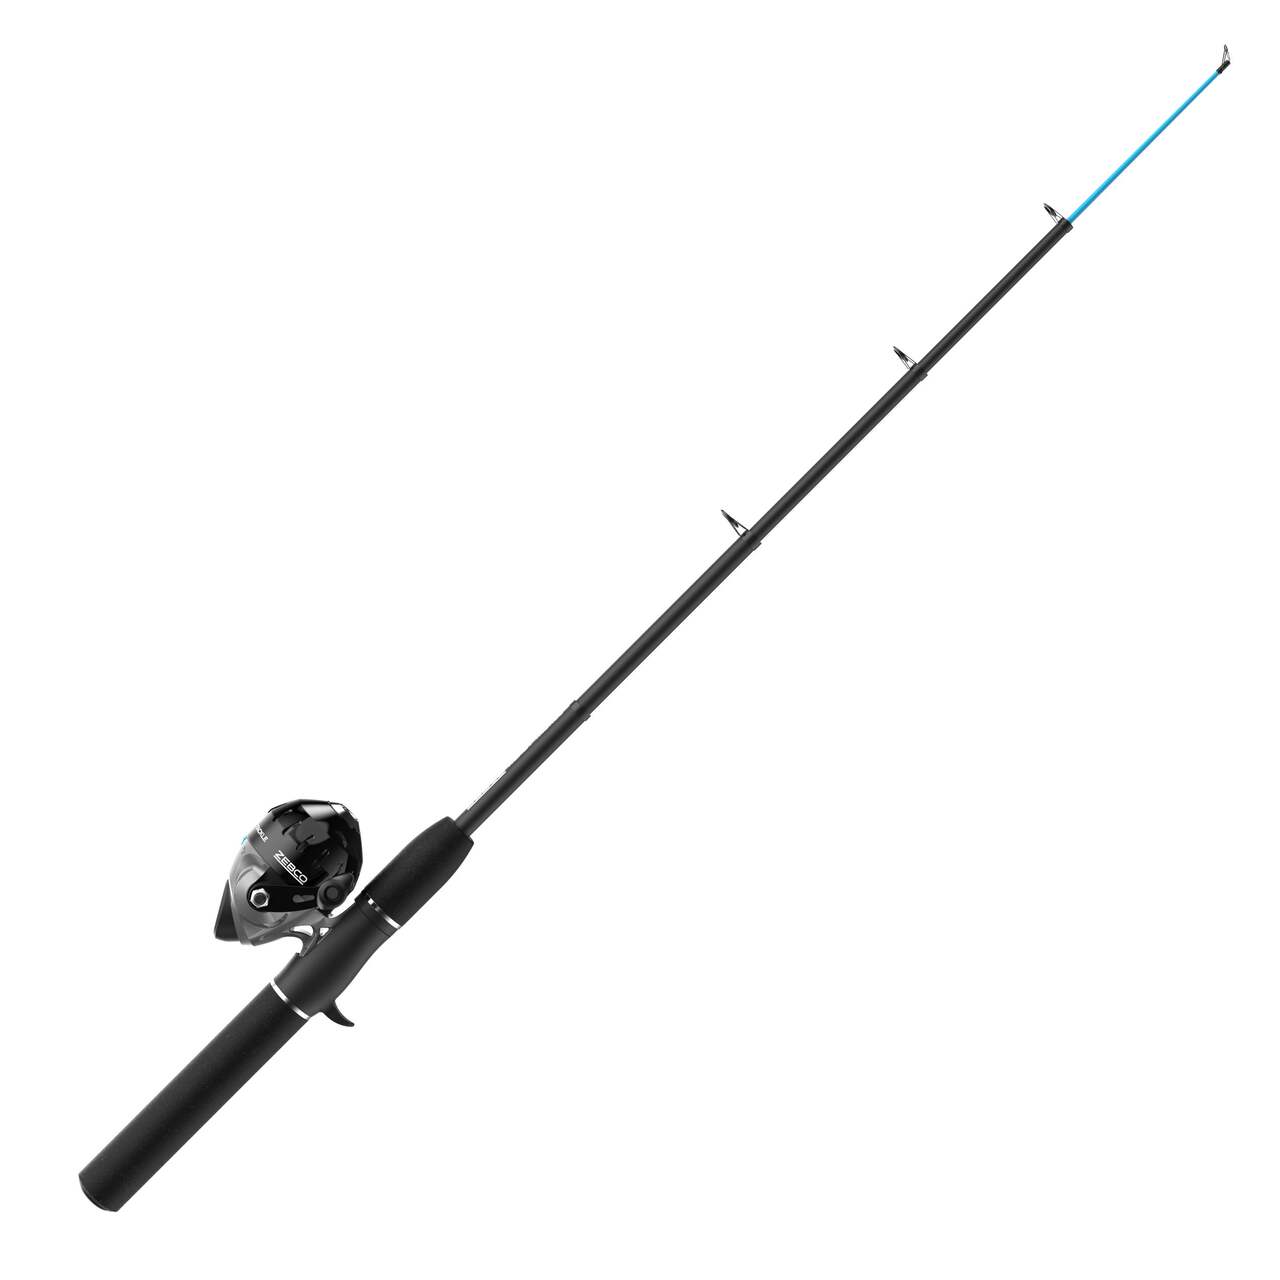 Buy Zebco Micro spincast Reel and Fishing Rod Combo, 2-Piece